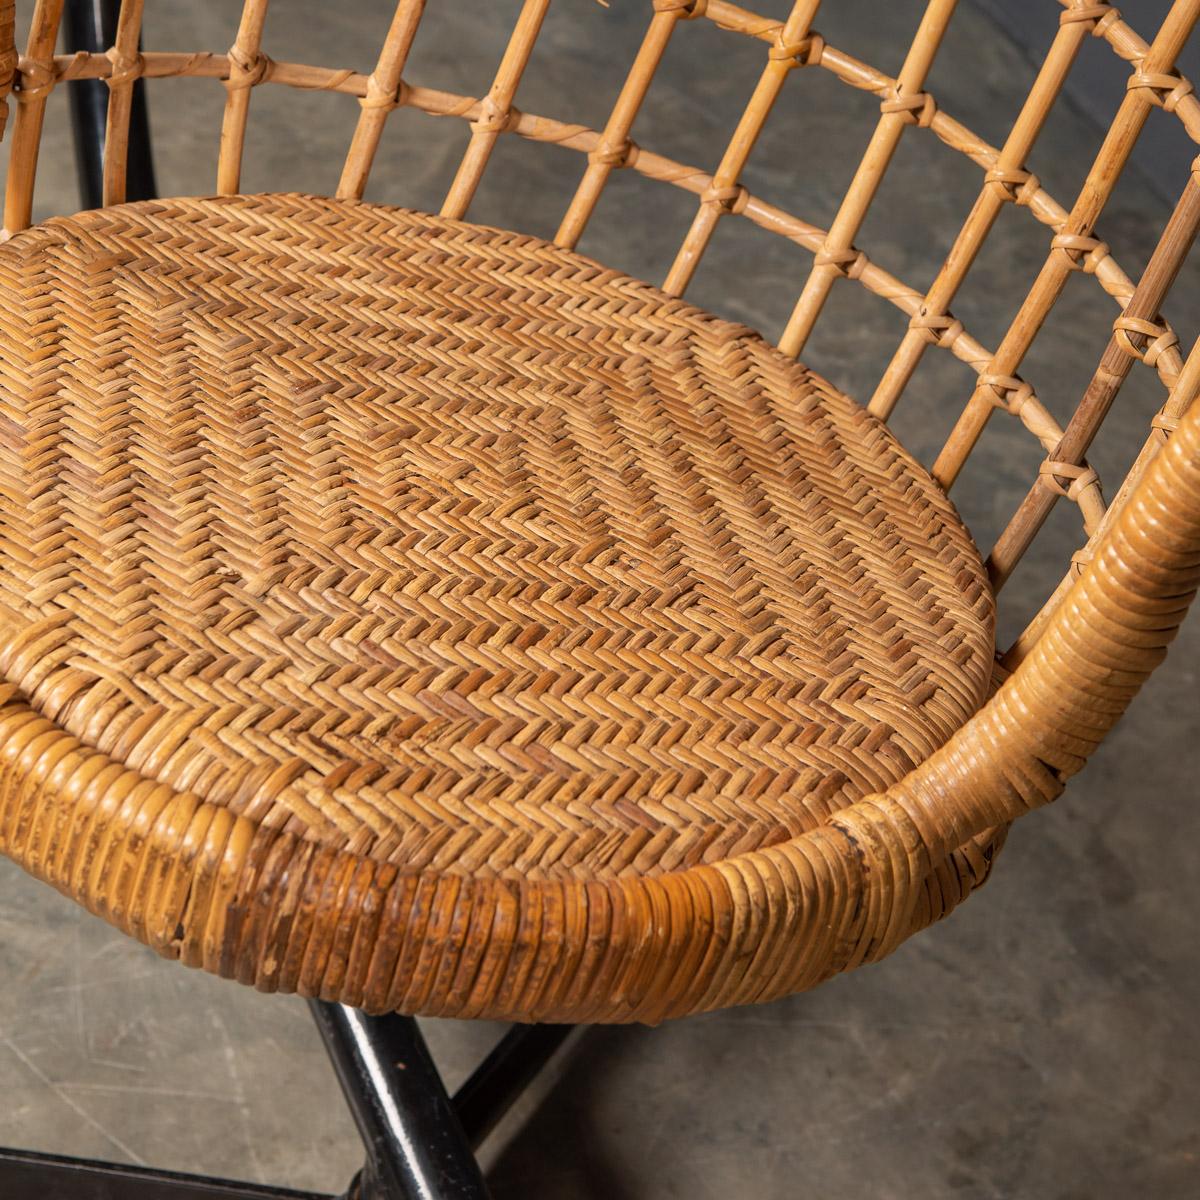 20th Century Hanging Wicker Woven Chair on Steel Frame, 1970s For Sale 4